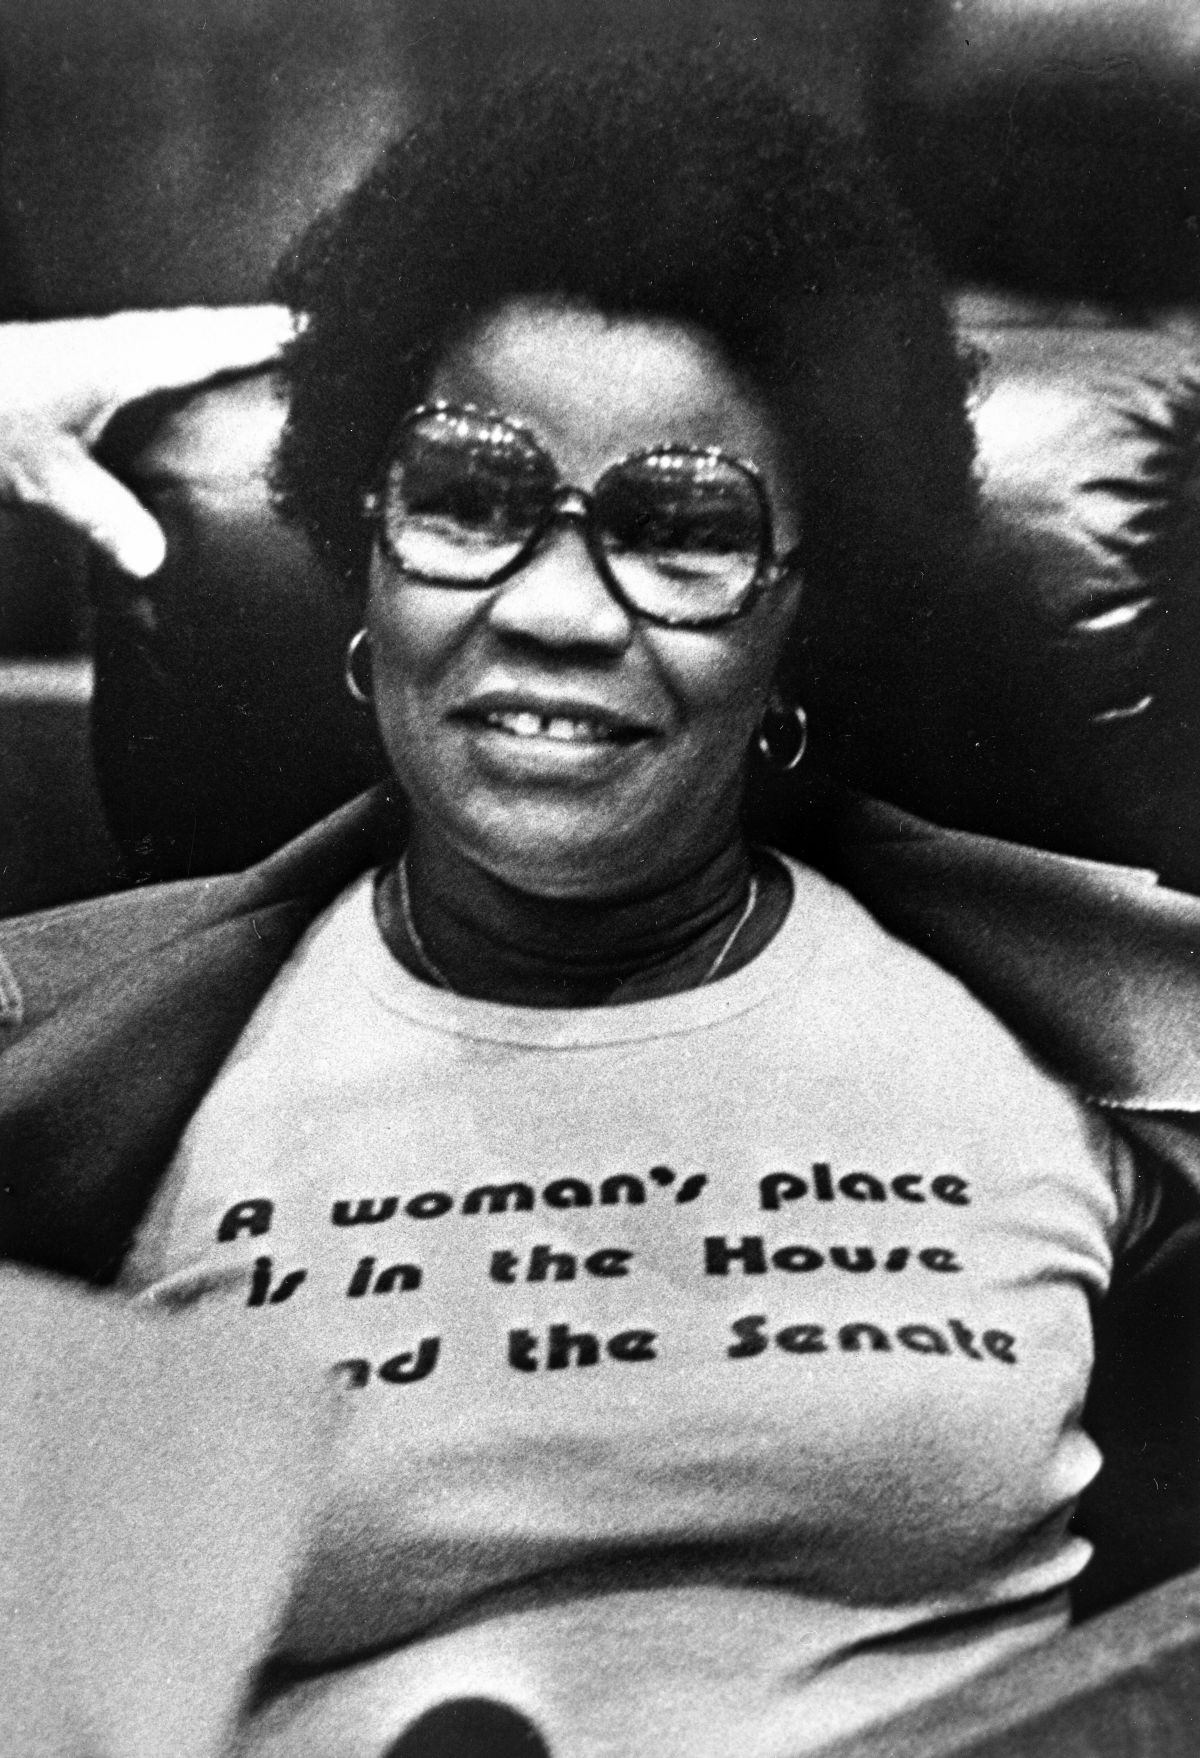 Representative Carrie Meet in the Florida House chamber in 1980.